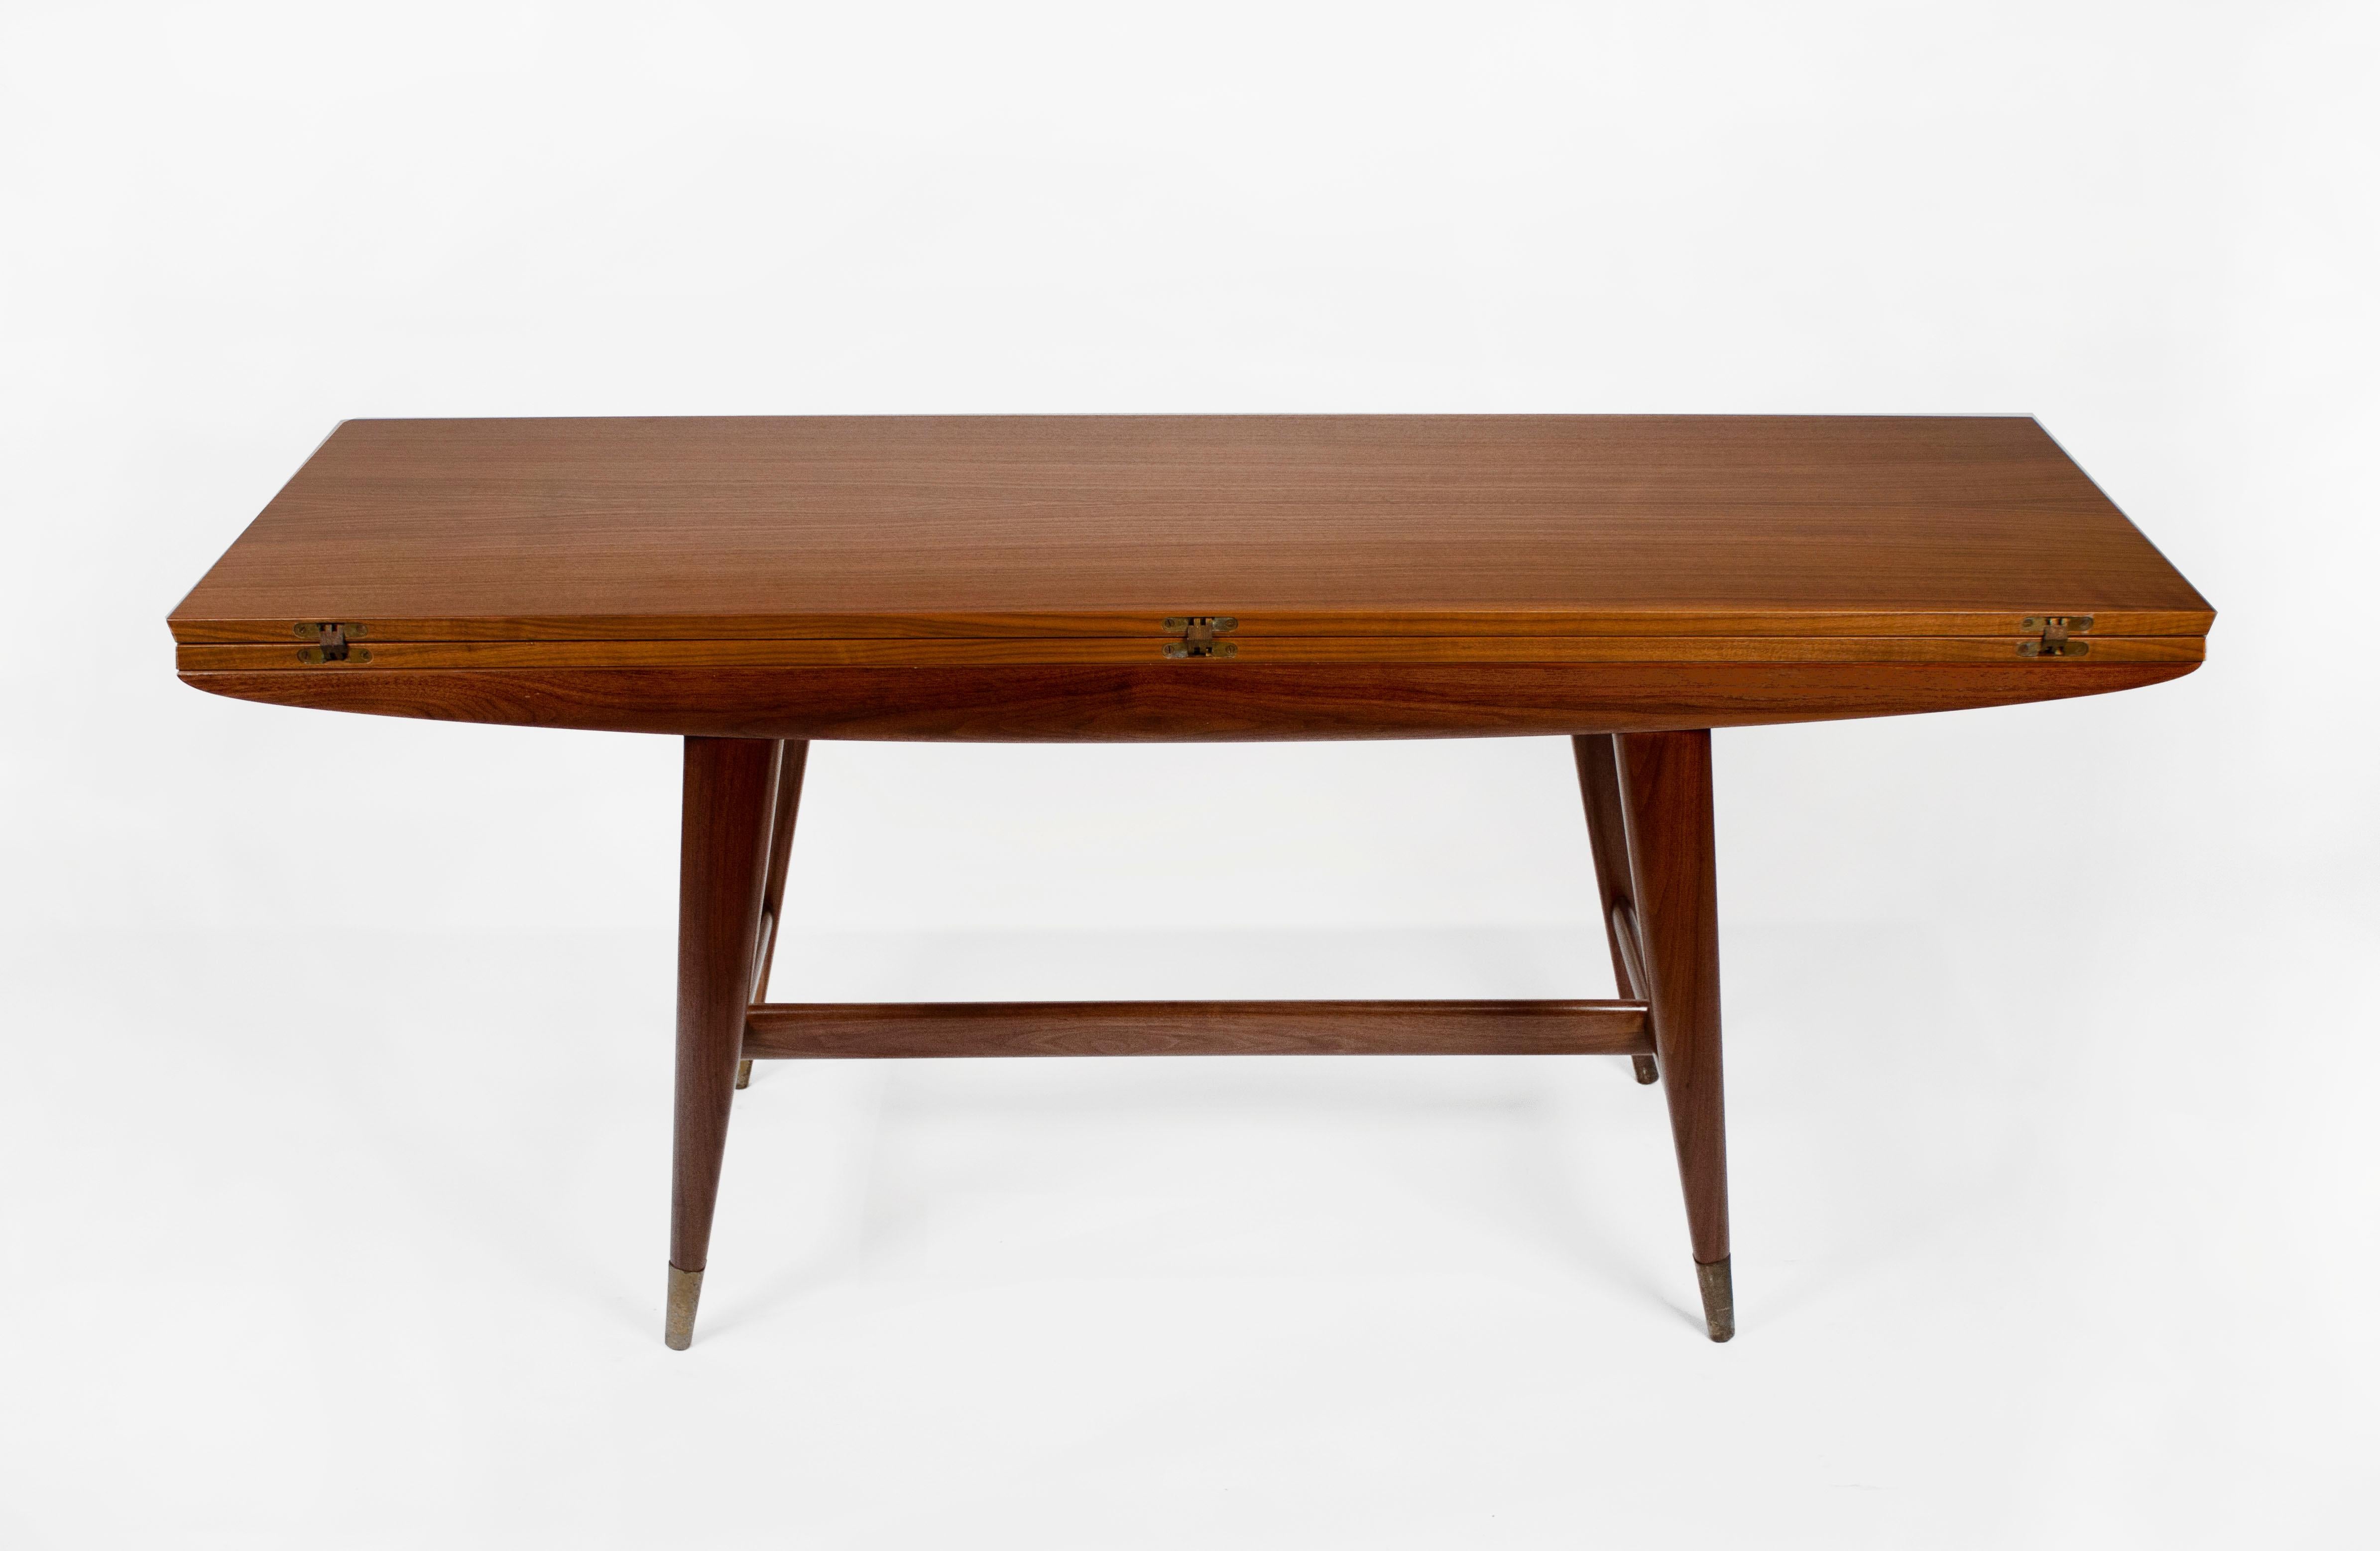 Mid-Century Modern Gio Ponti Convertible Console / Dining Table for M. Singer & Sons in Walnut 1950